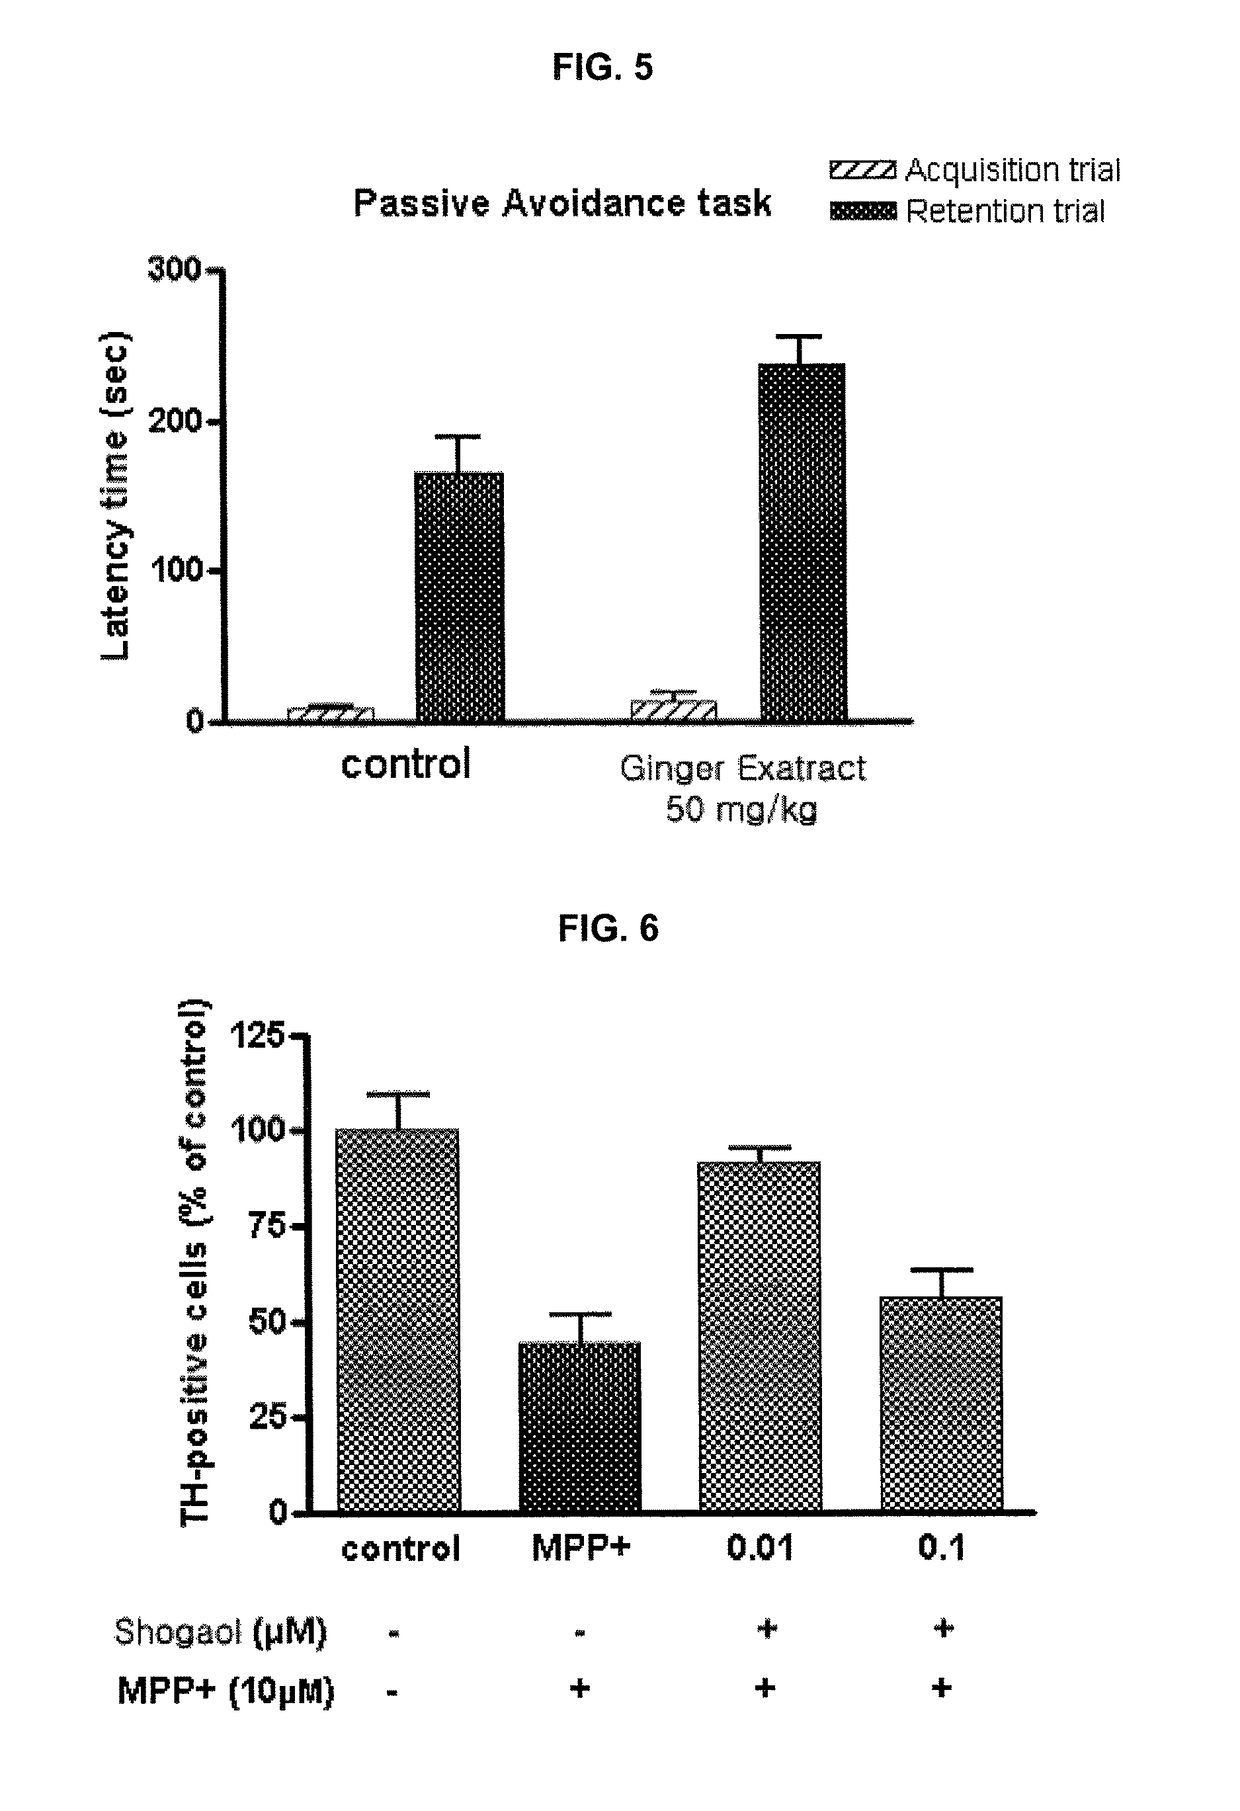 Pharmaceutical composition comprising ginger extract or shogaol